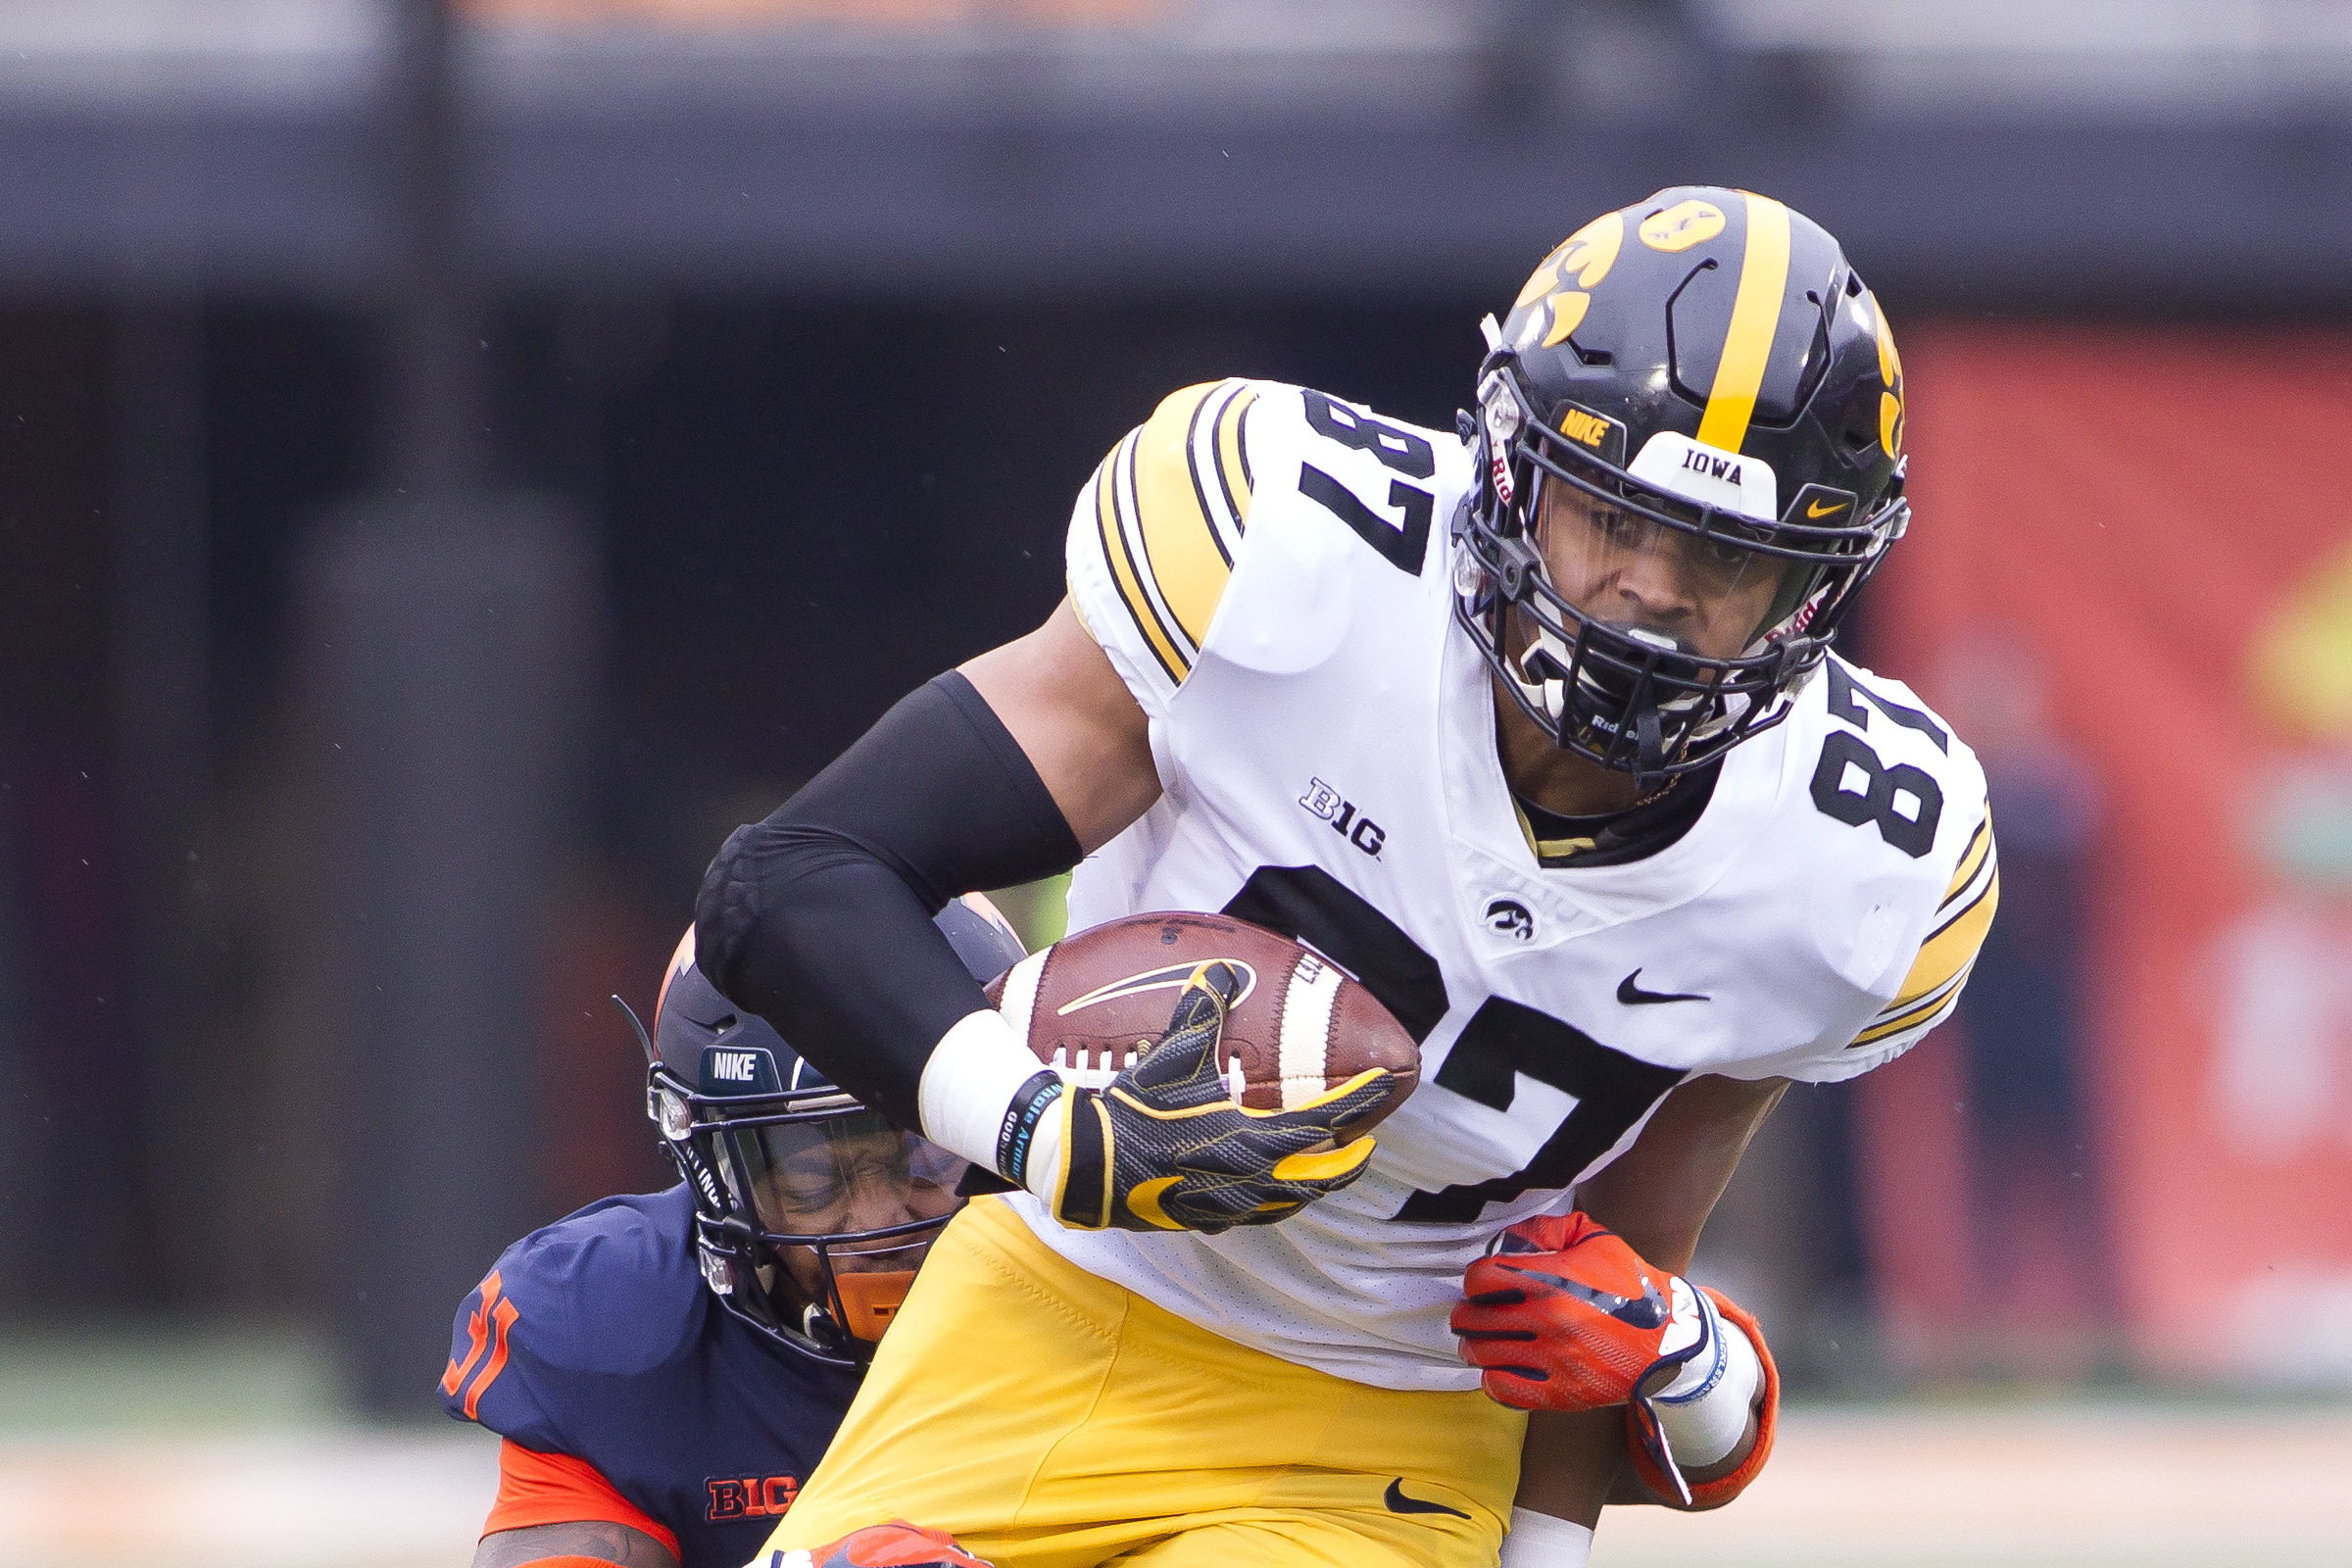 Hawkeye Heaven - Noah Fant was selected 20th overall by the Denver Broncos  in the first round of the 2019 NFL Draft. On March 16, 2022, Fant was  traded to the Seattle